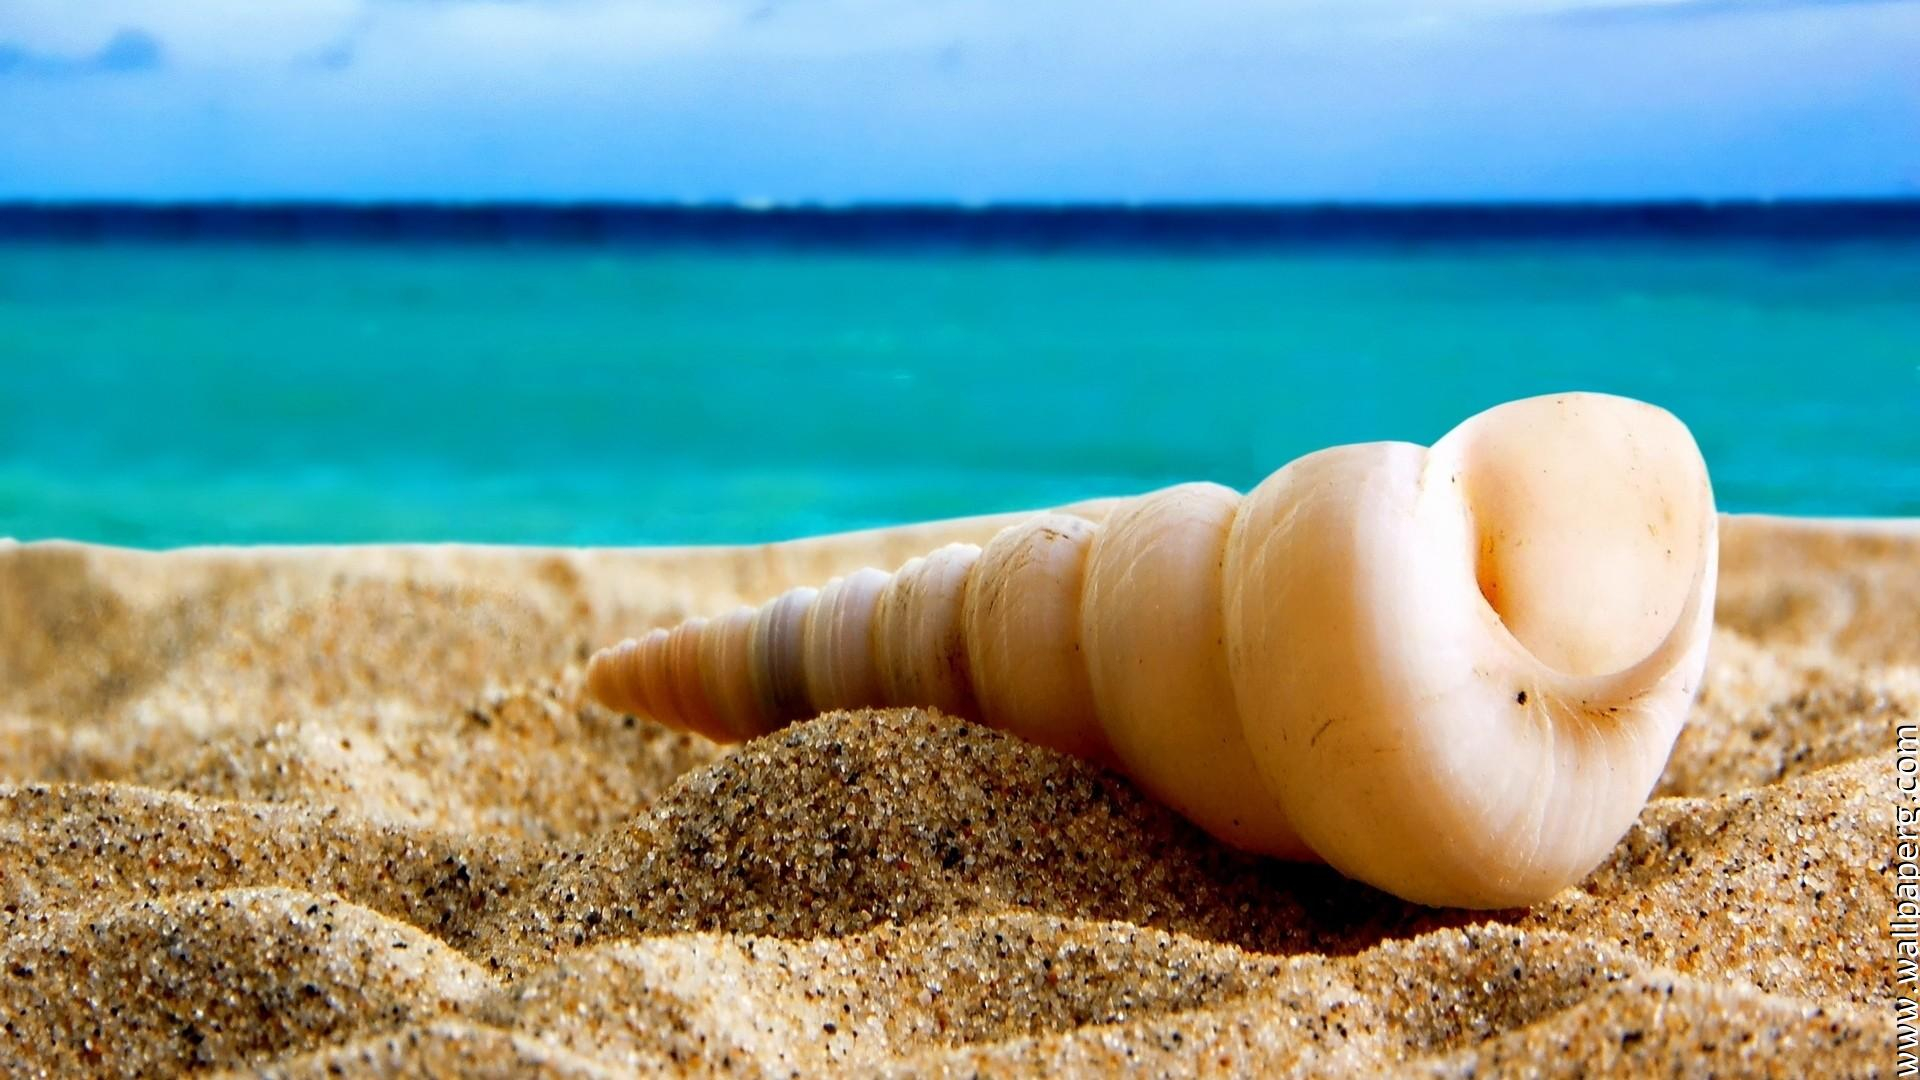 1920x1080 Download Beach sand seashells hd wallpapers Underwater world- For Mobile Phone